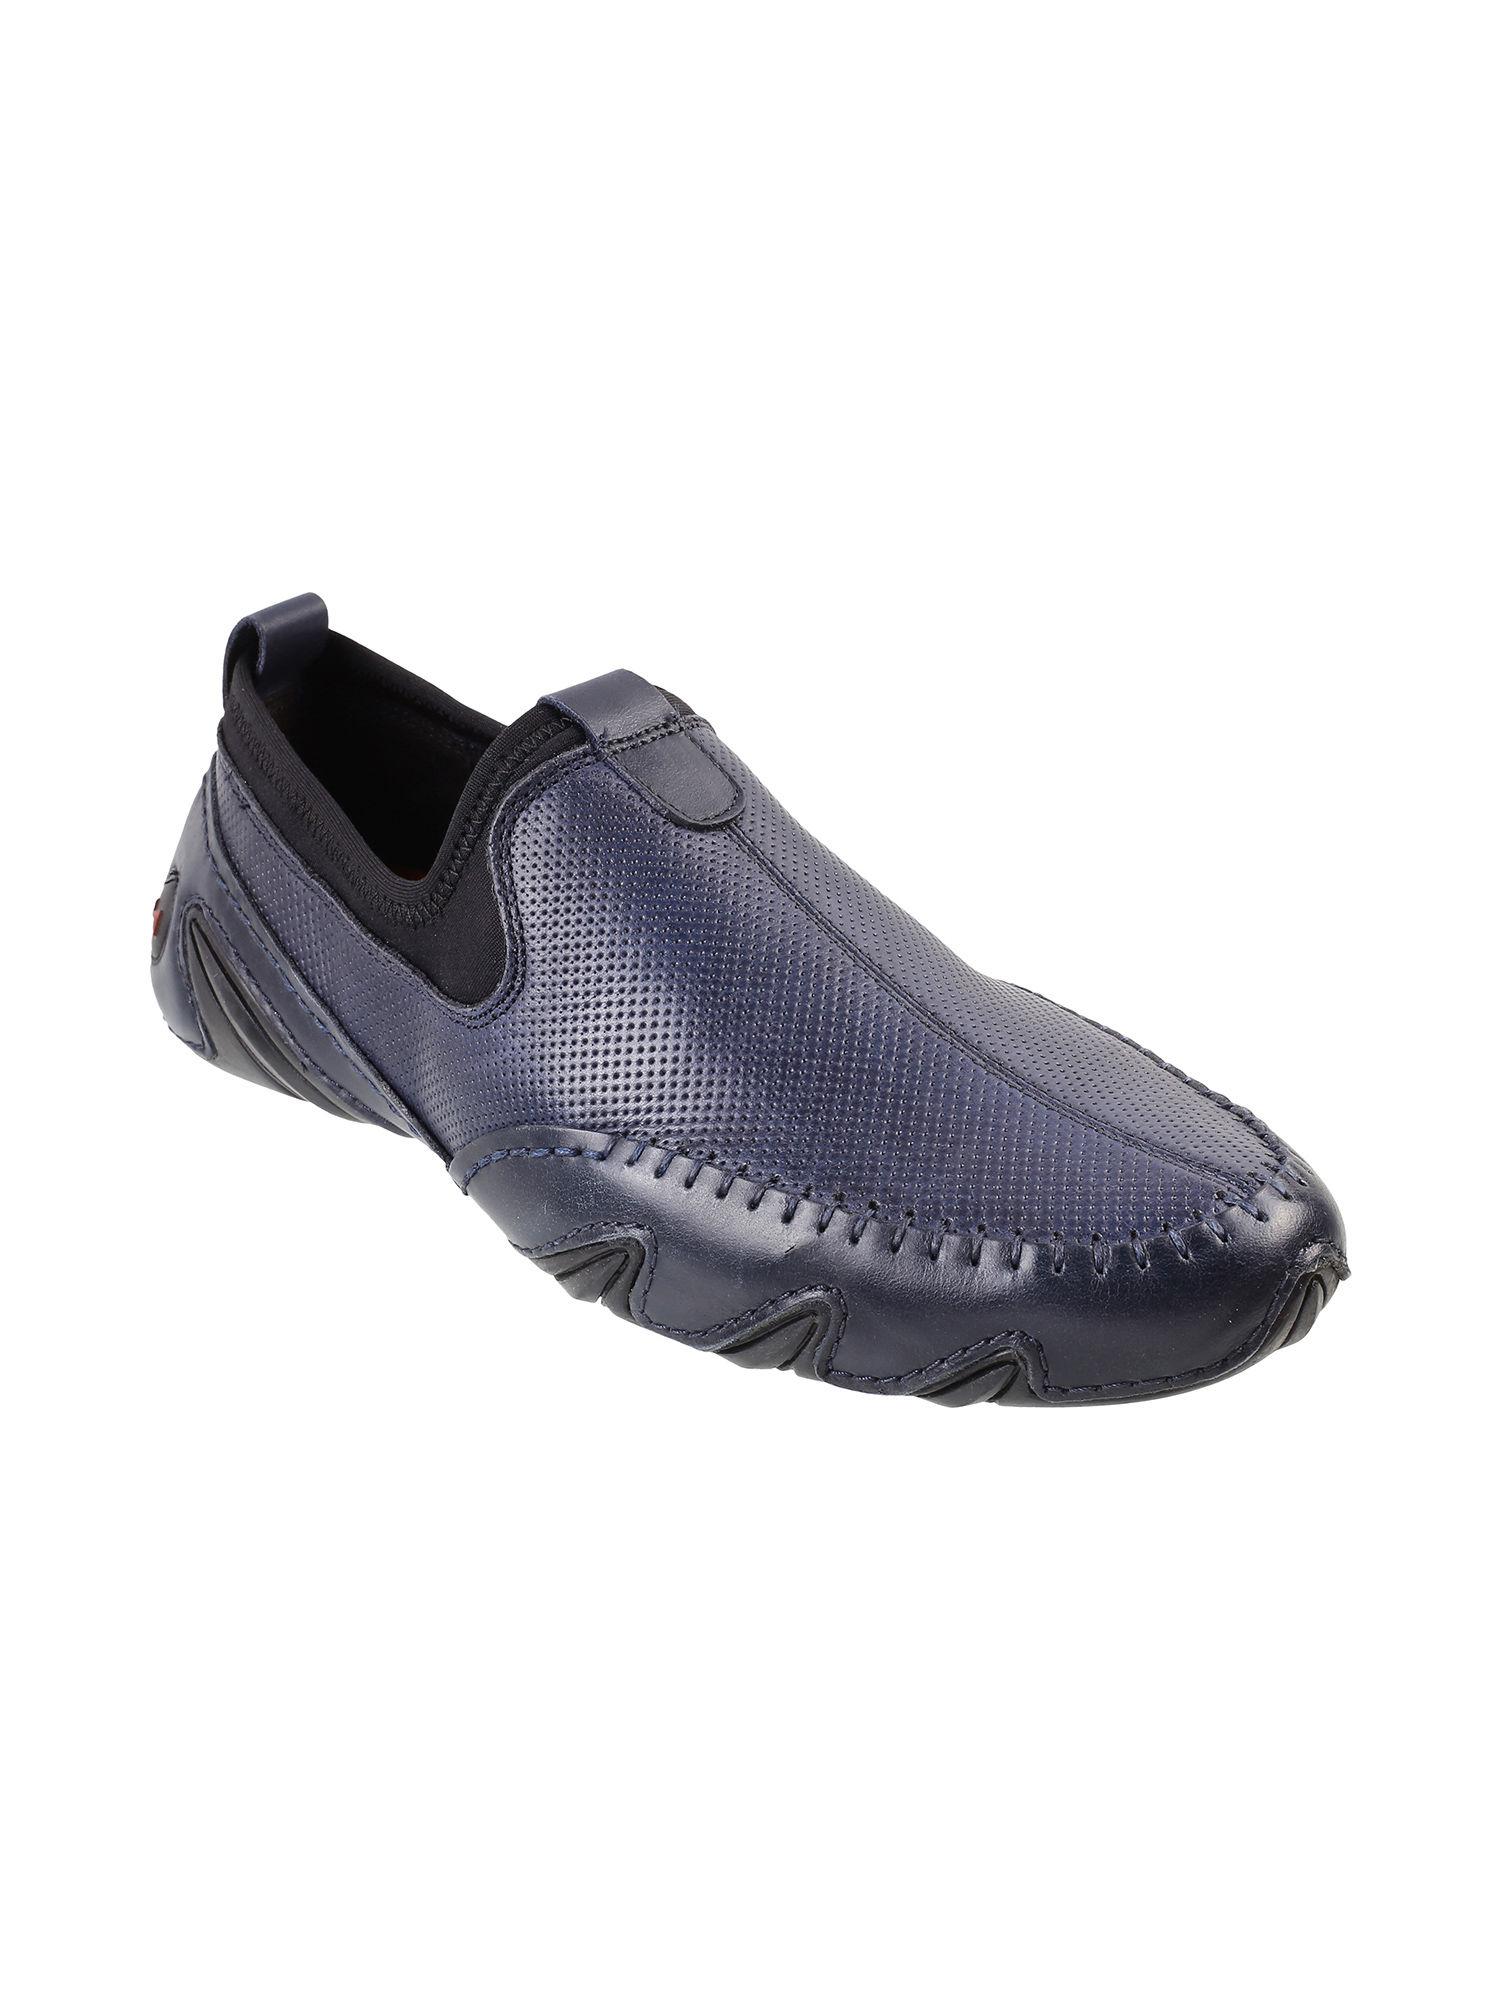 textured mens leather navy blue loafers